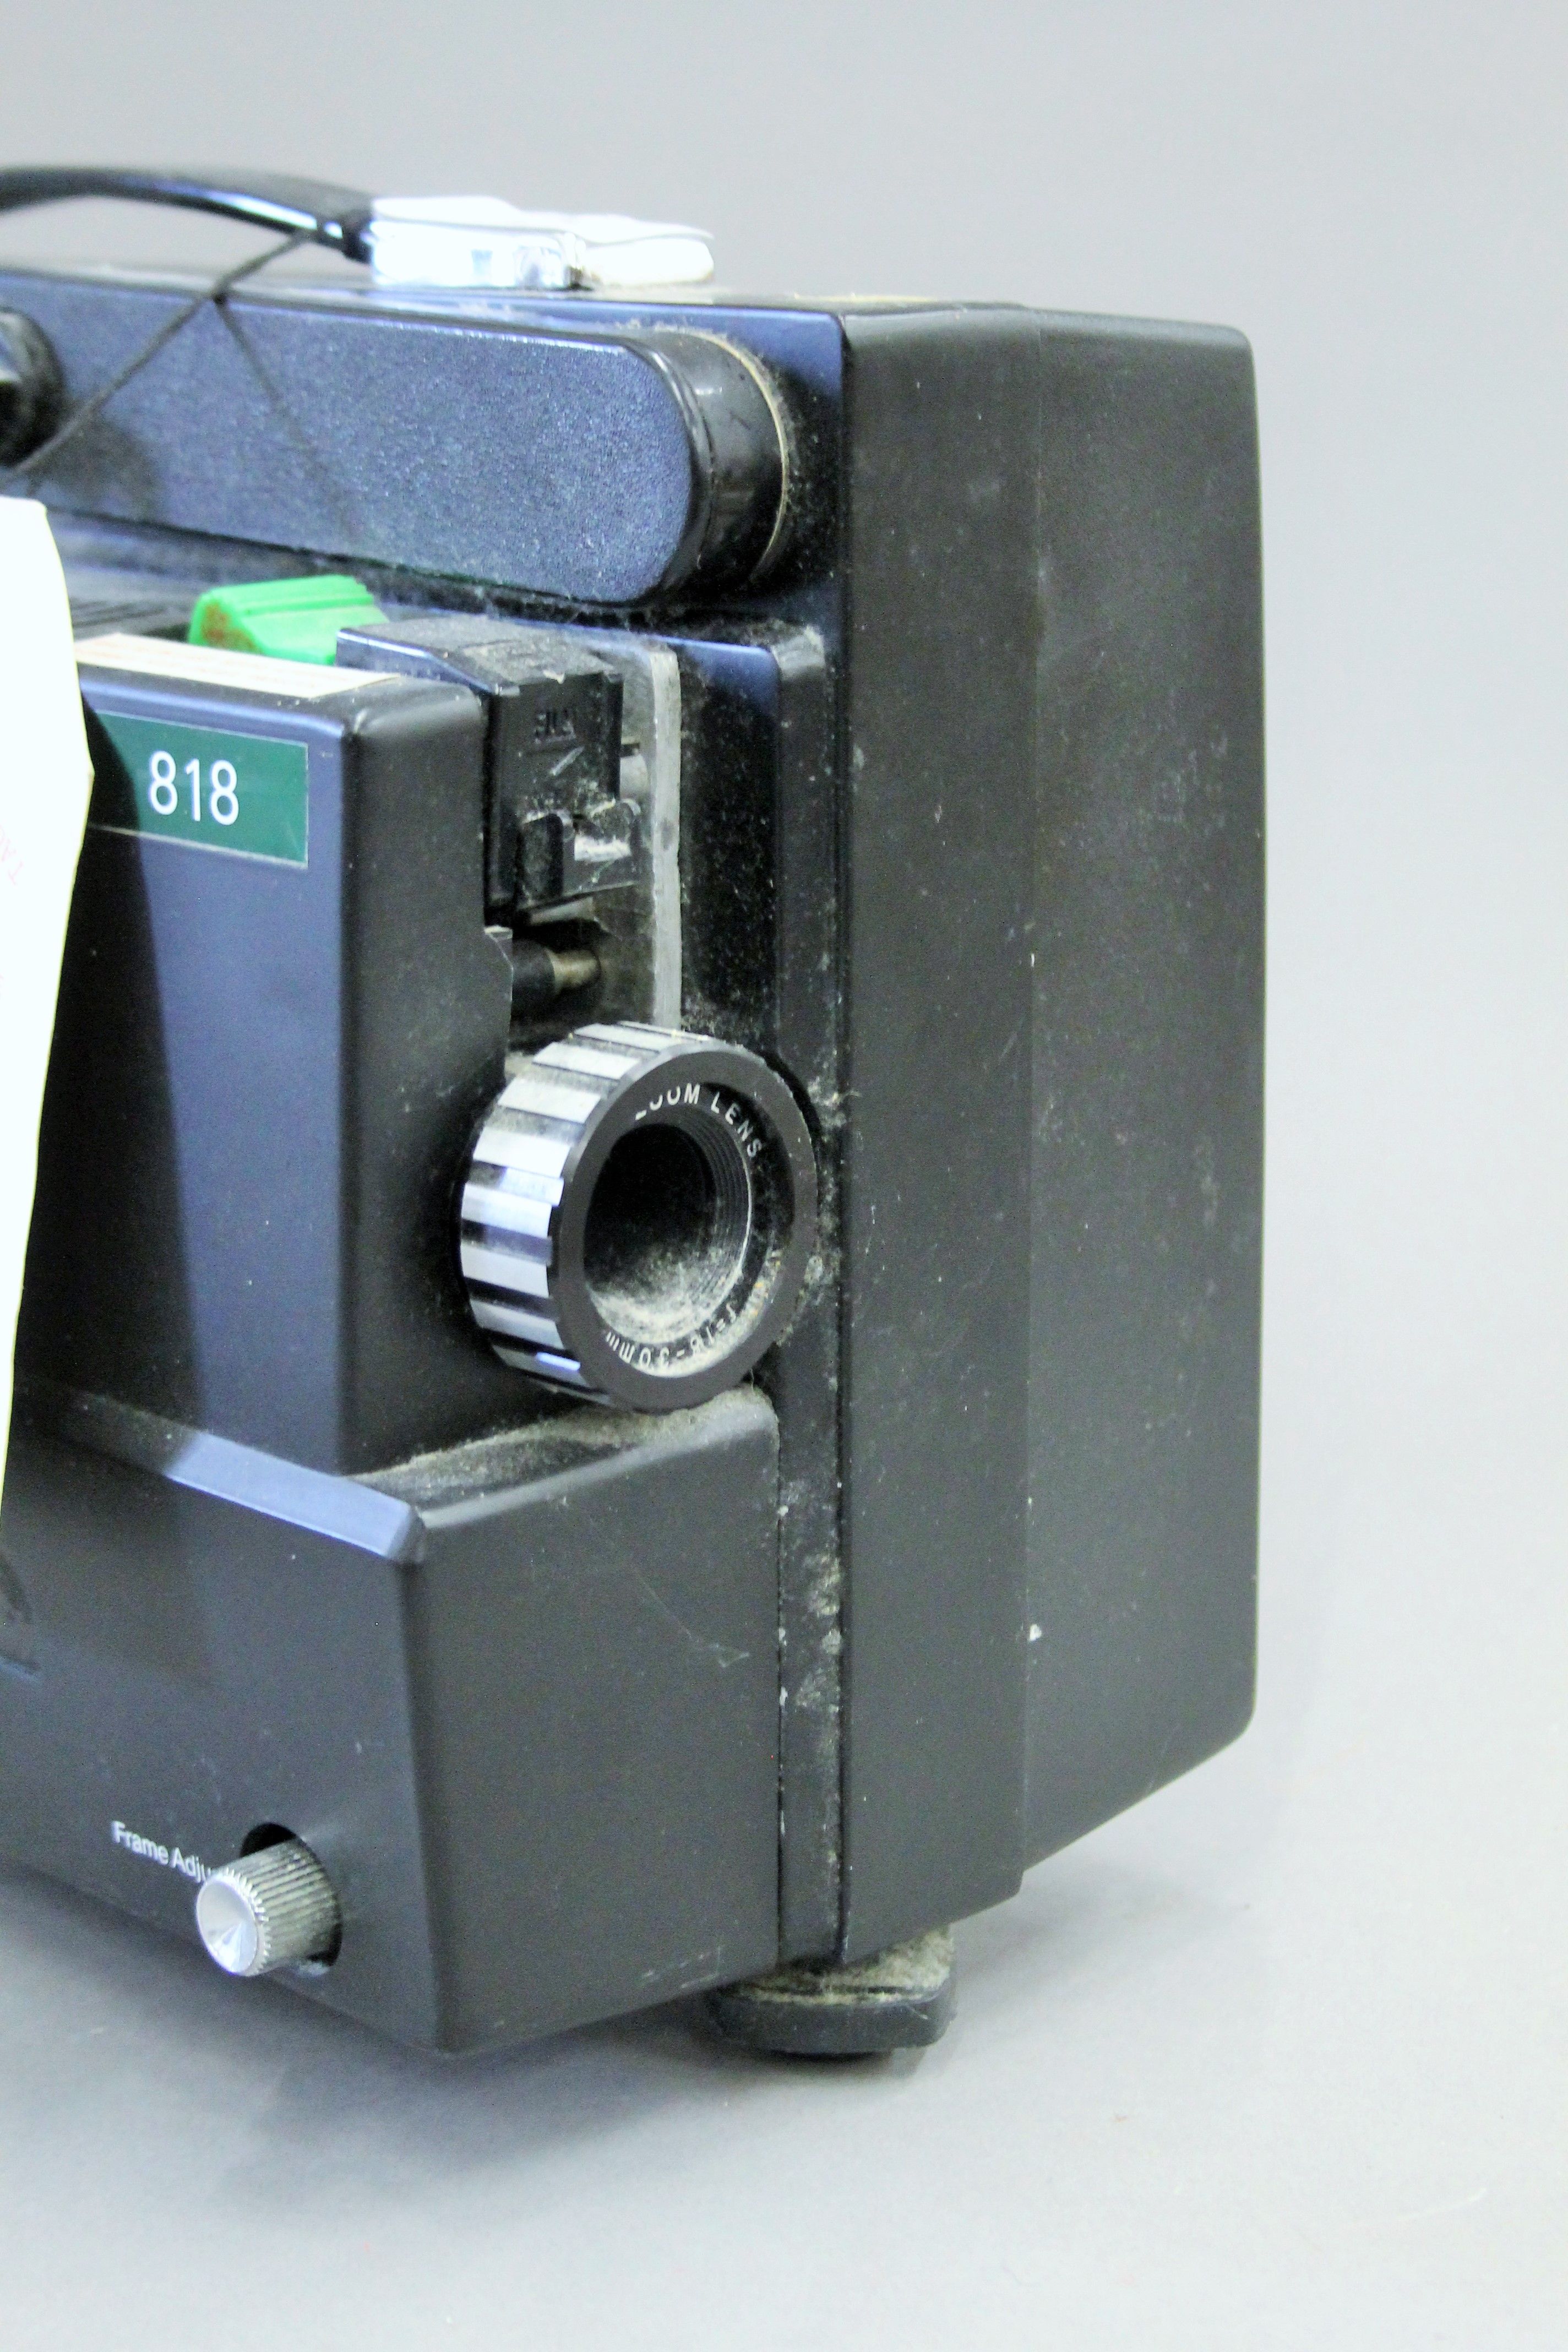 An 818 Cine Film projector. - Image 2 of 3